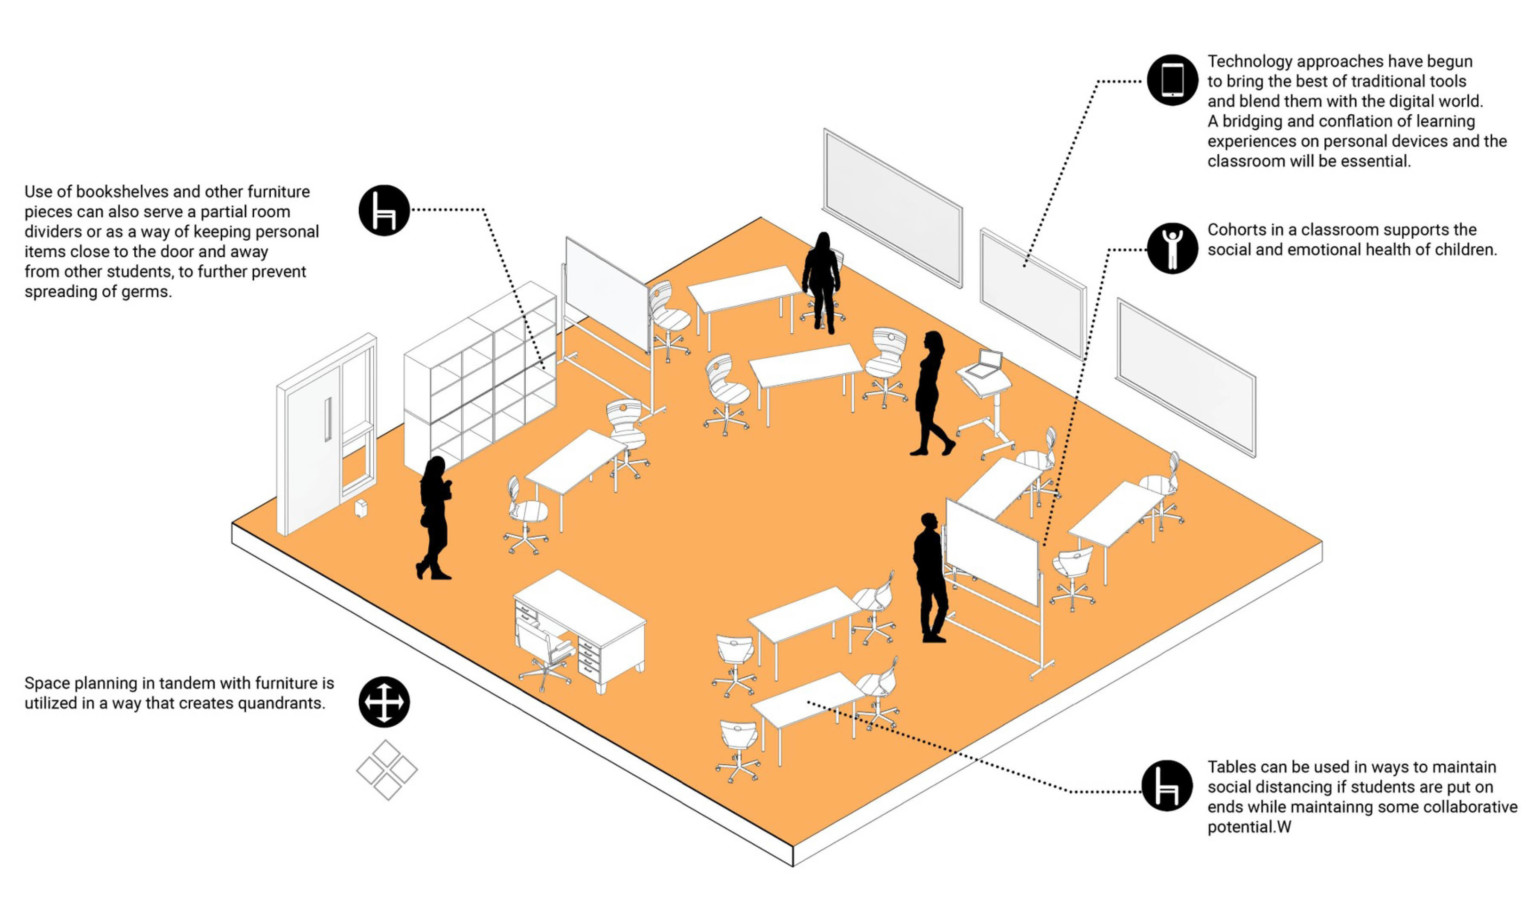 Aerial view of potential classroom solution using space planning and furniture to form socially distant cohorts